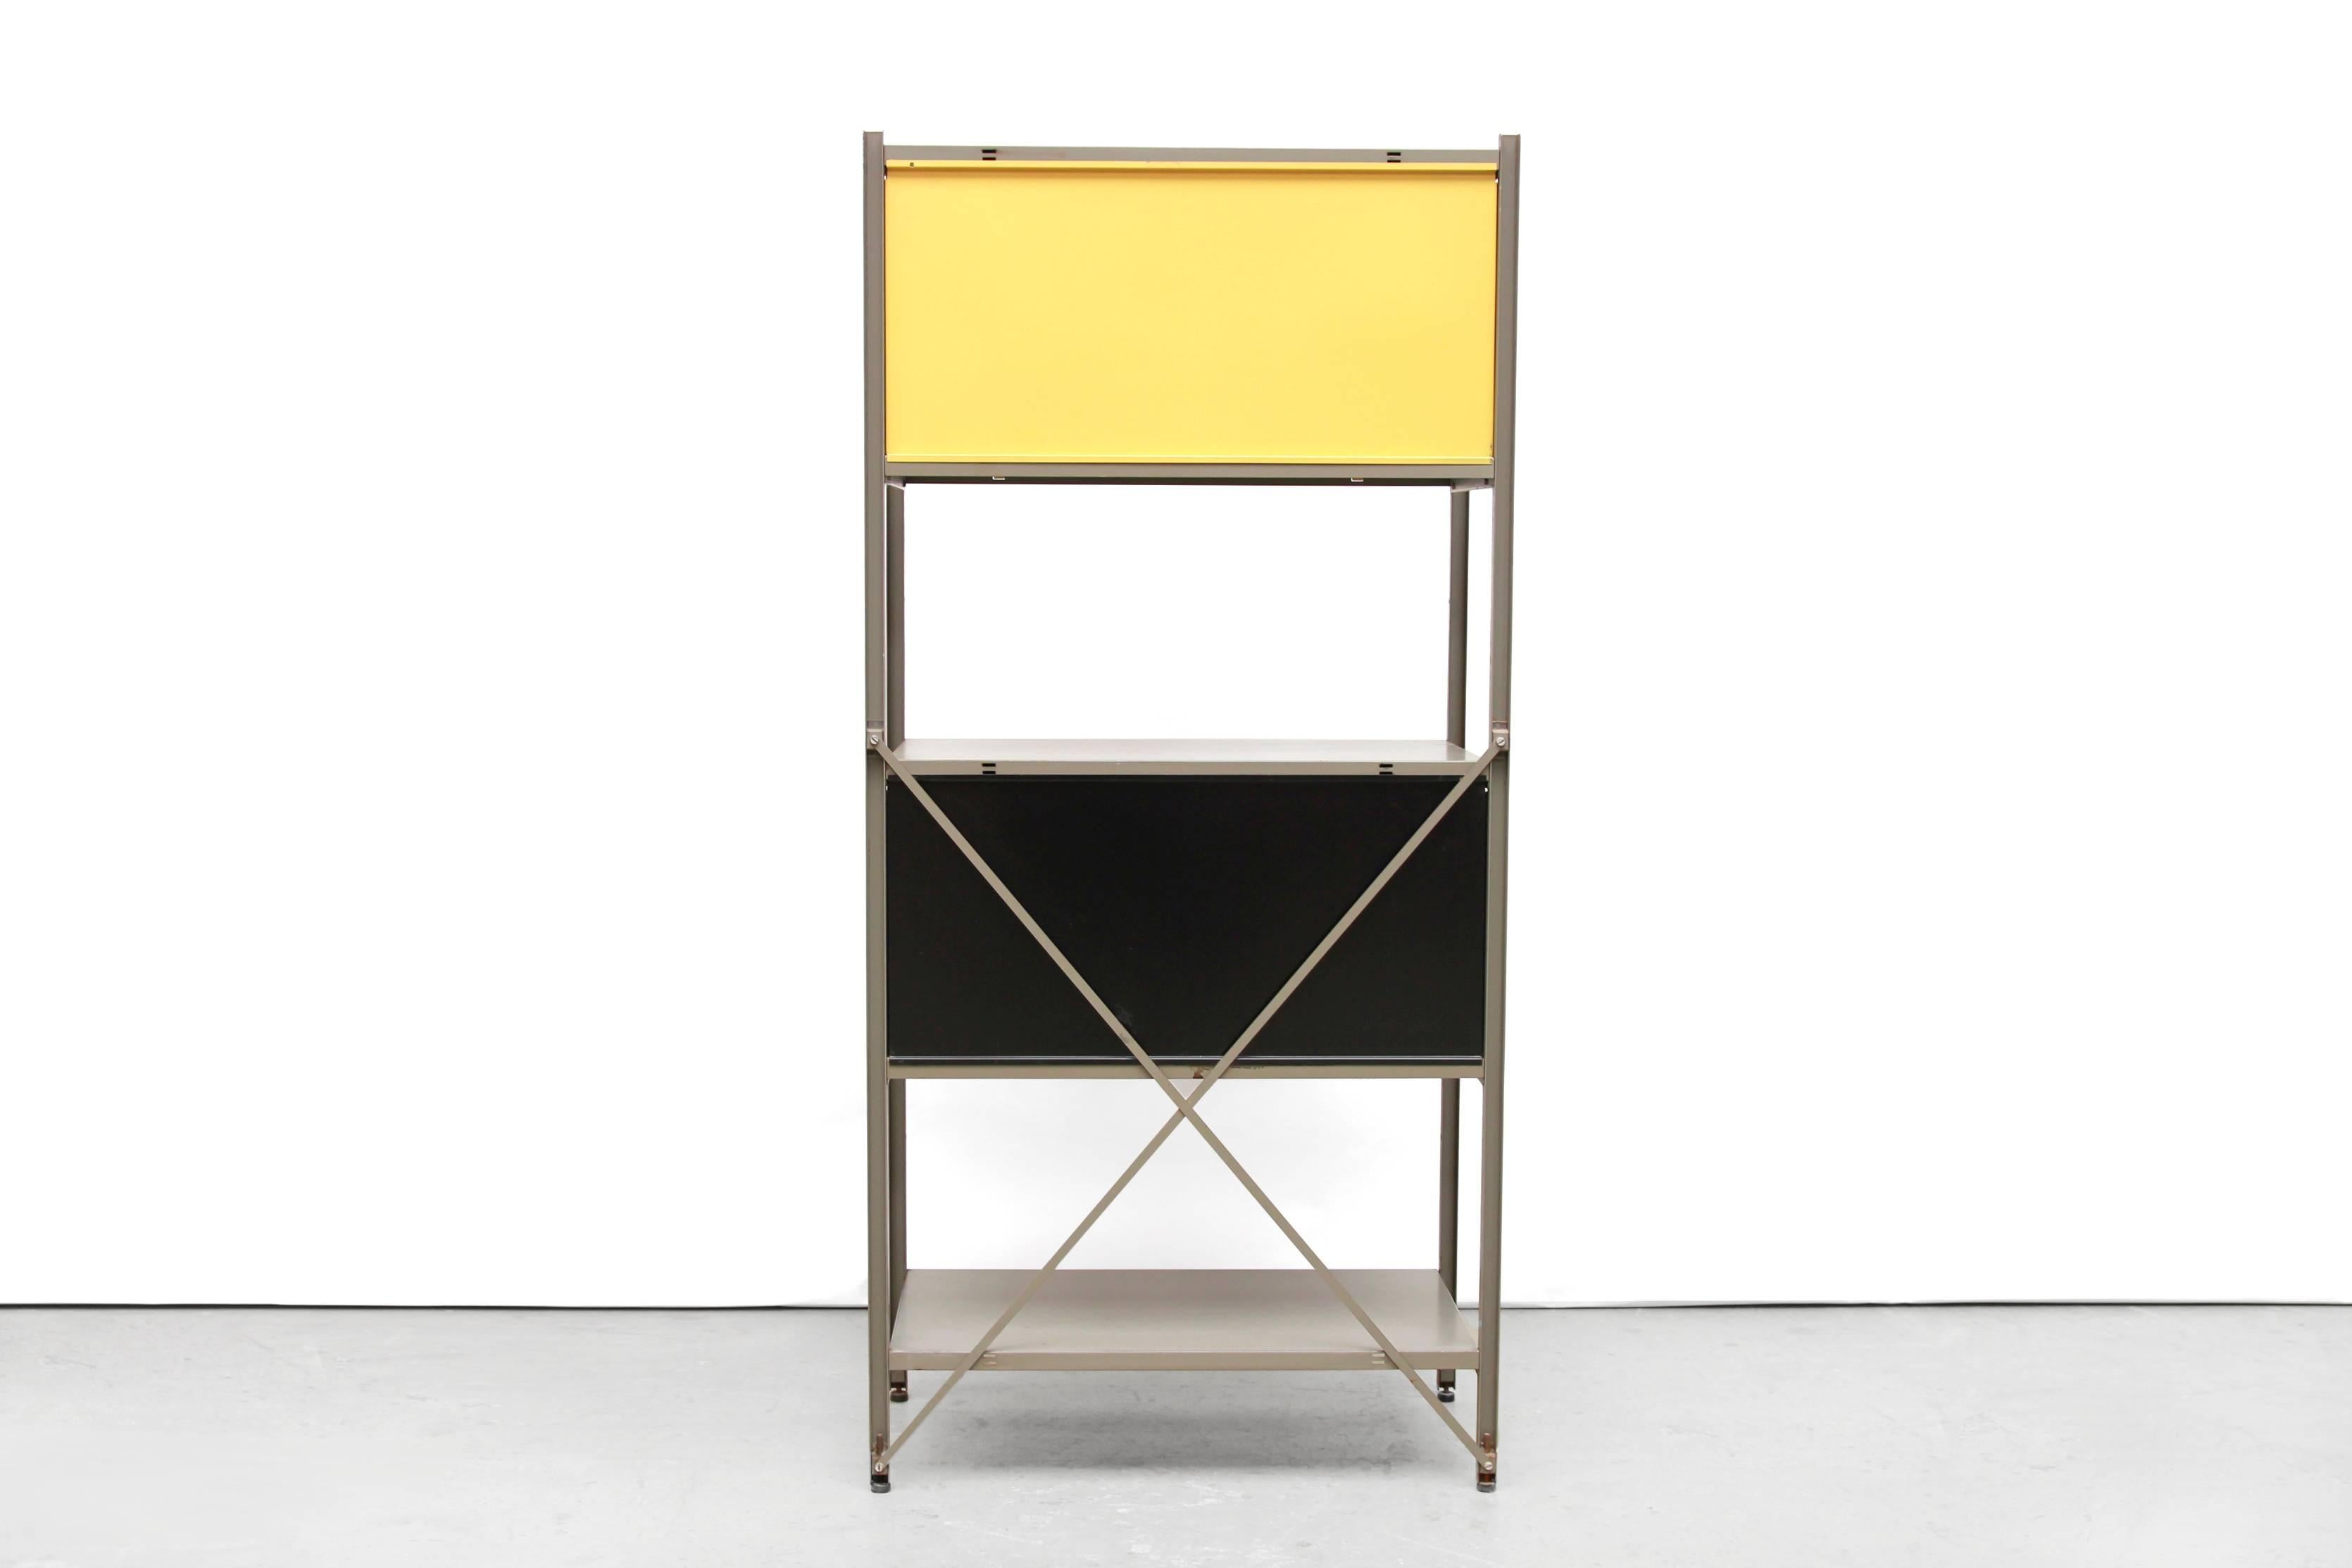 Lacquered Industrial Metal Cabinet or Divider Model No. 663 by Wim Rietveld for Gispen